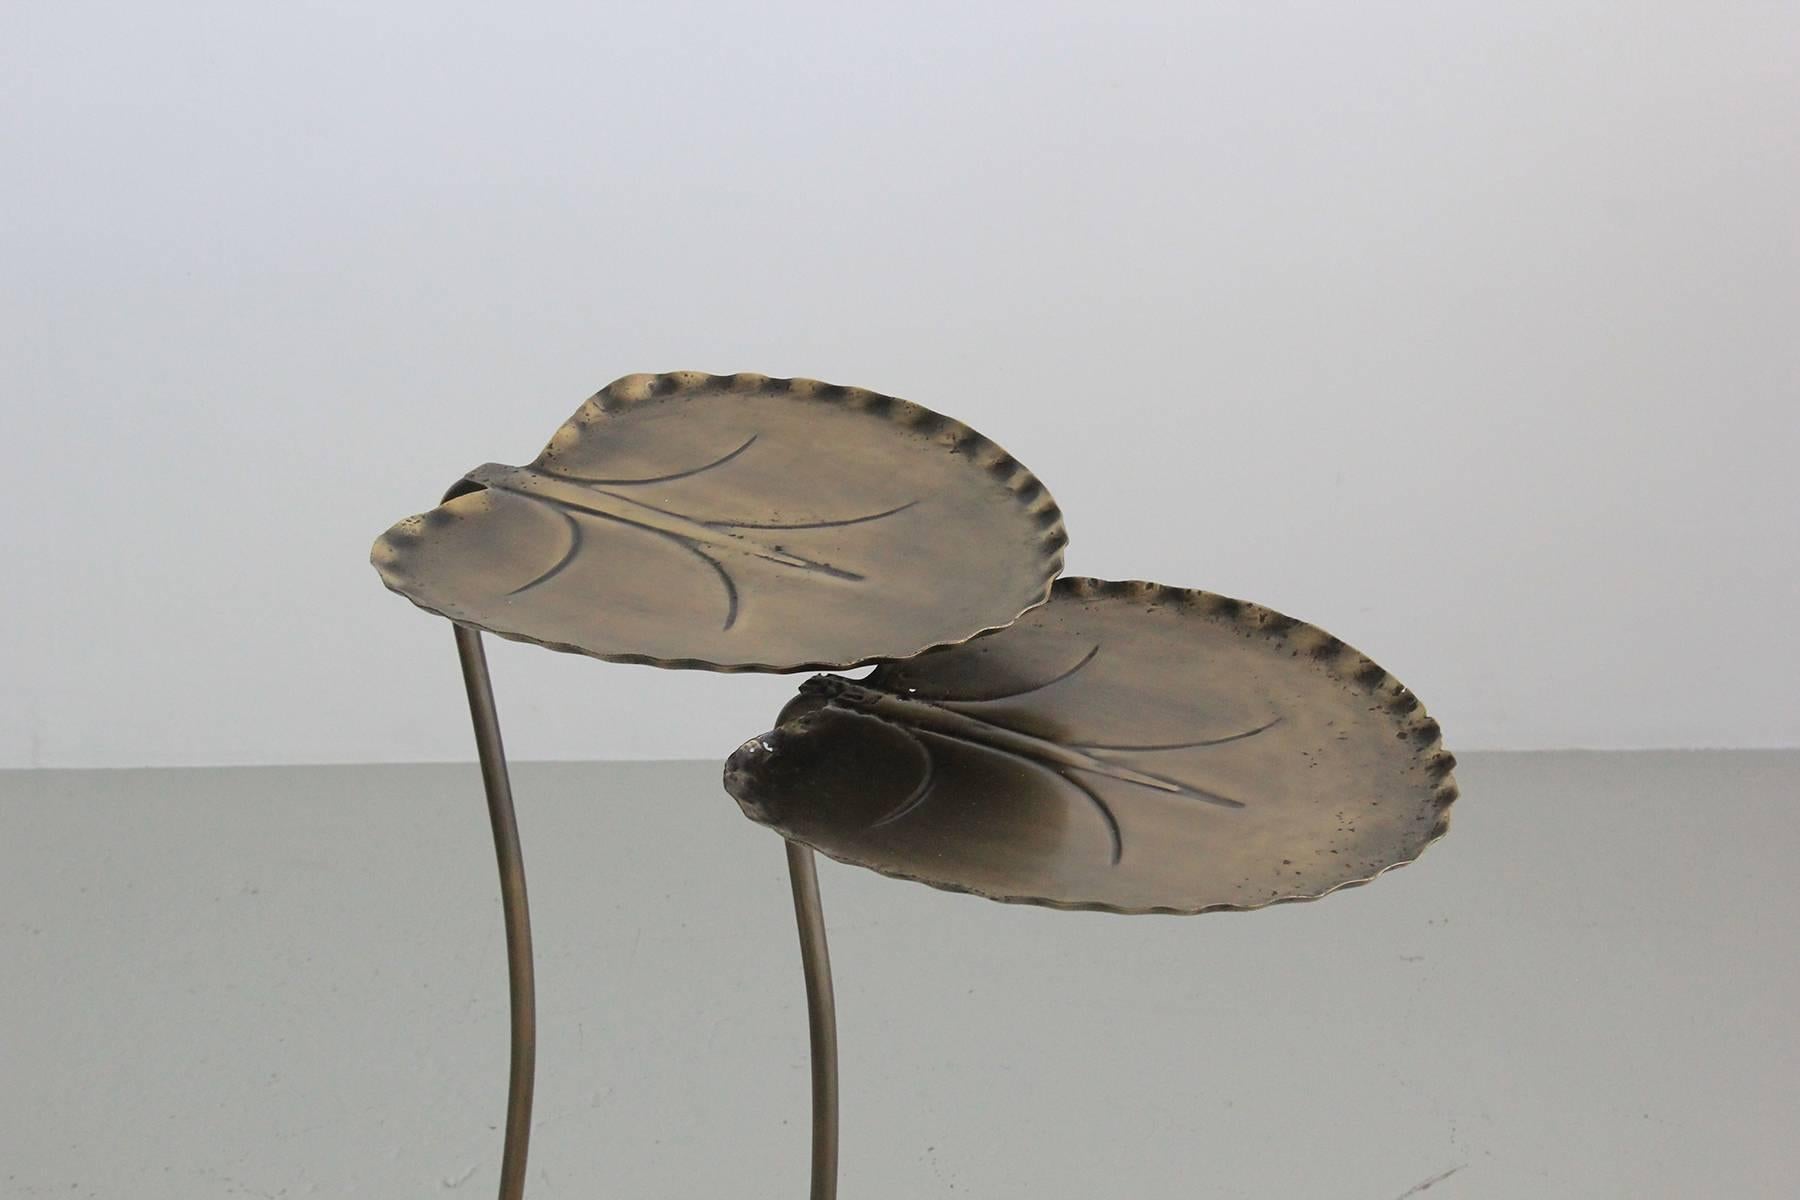 Pair of metal lily pad nesting tables designed by John Salterini. One is larger that the other and they nest together. 

Dimensions in listing are for the two tables nestled together. 

Individual dimensions are: 
Large table: H 20 in., D 12.5